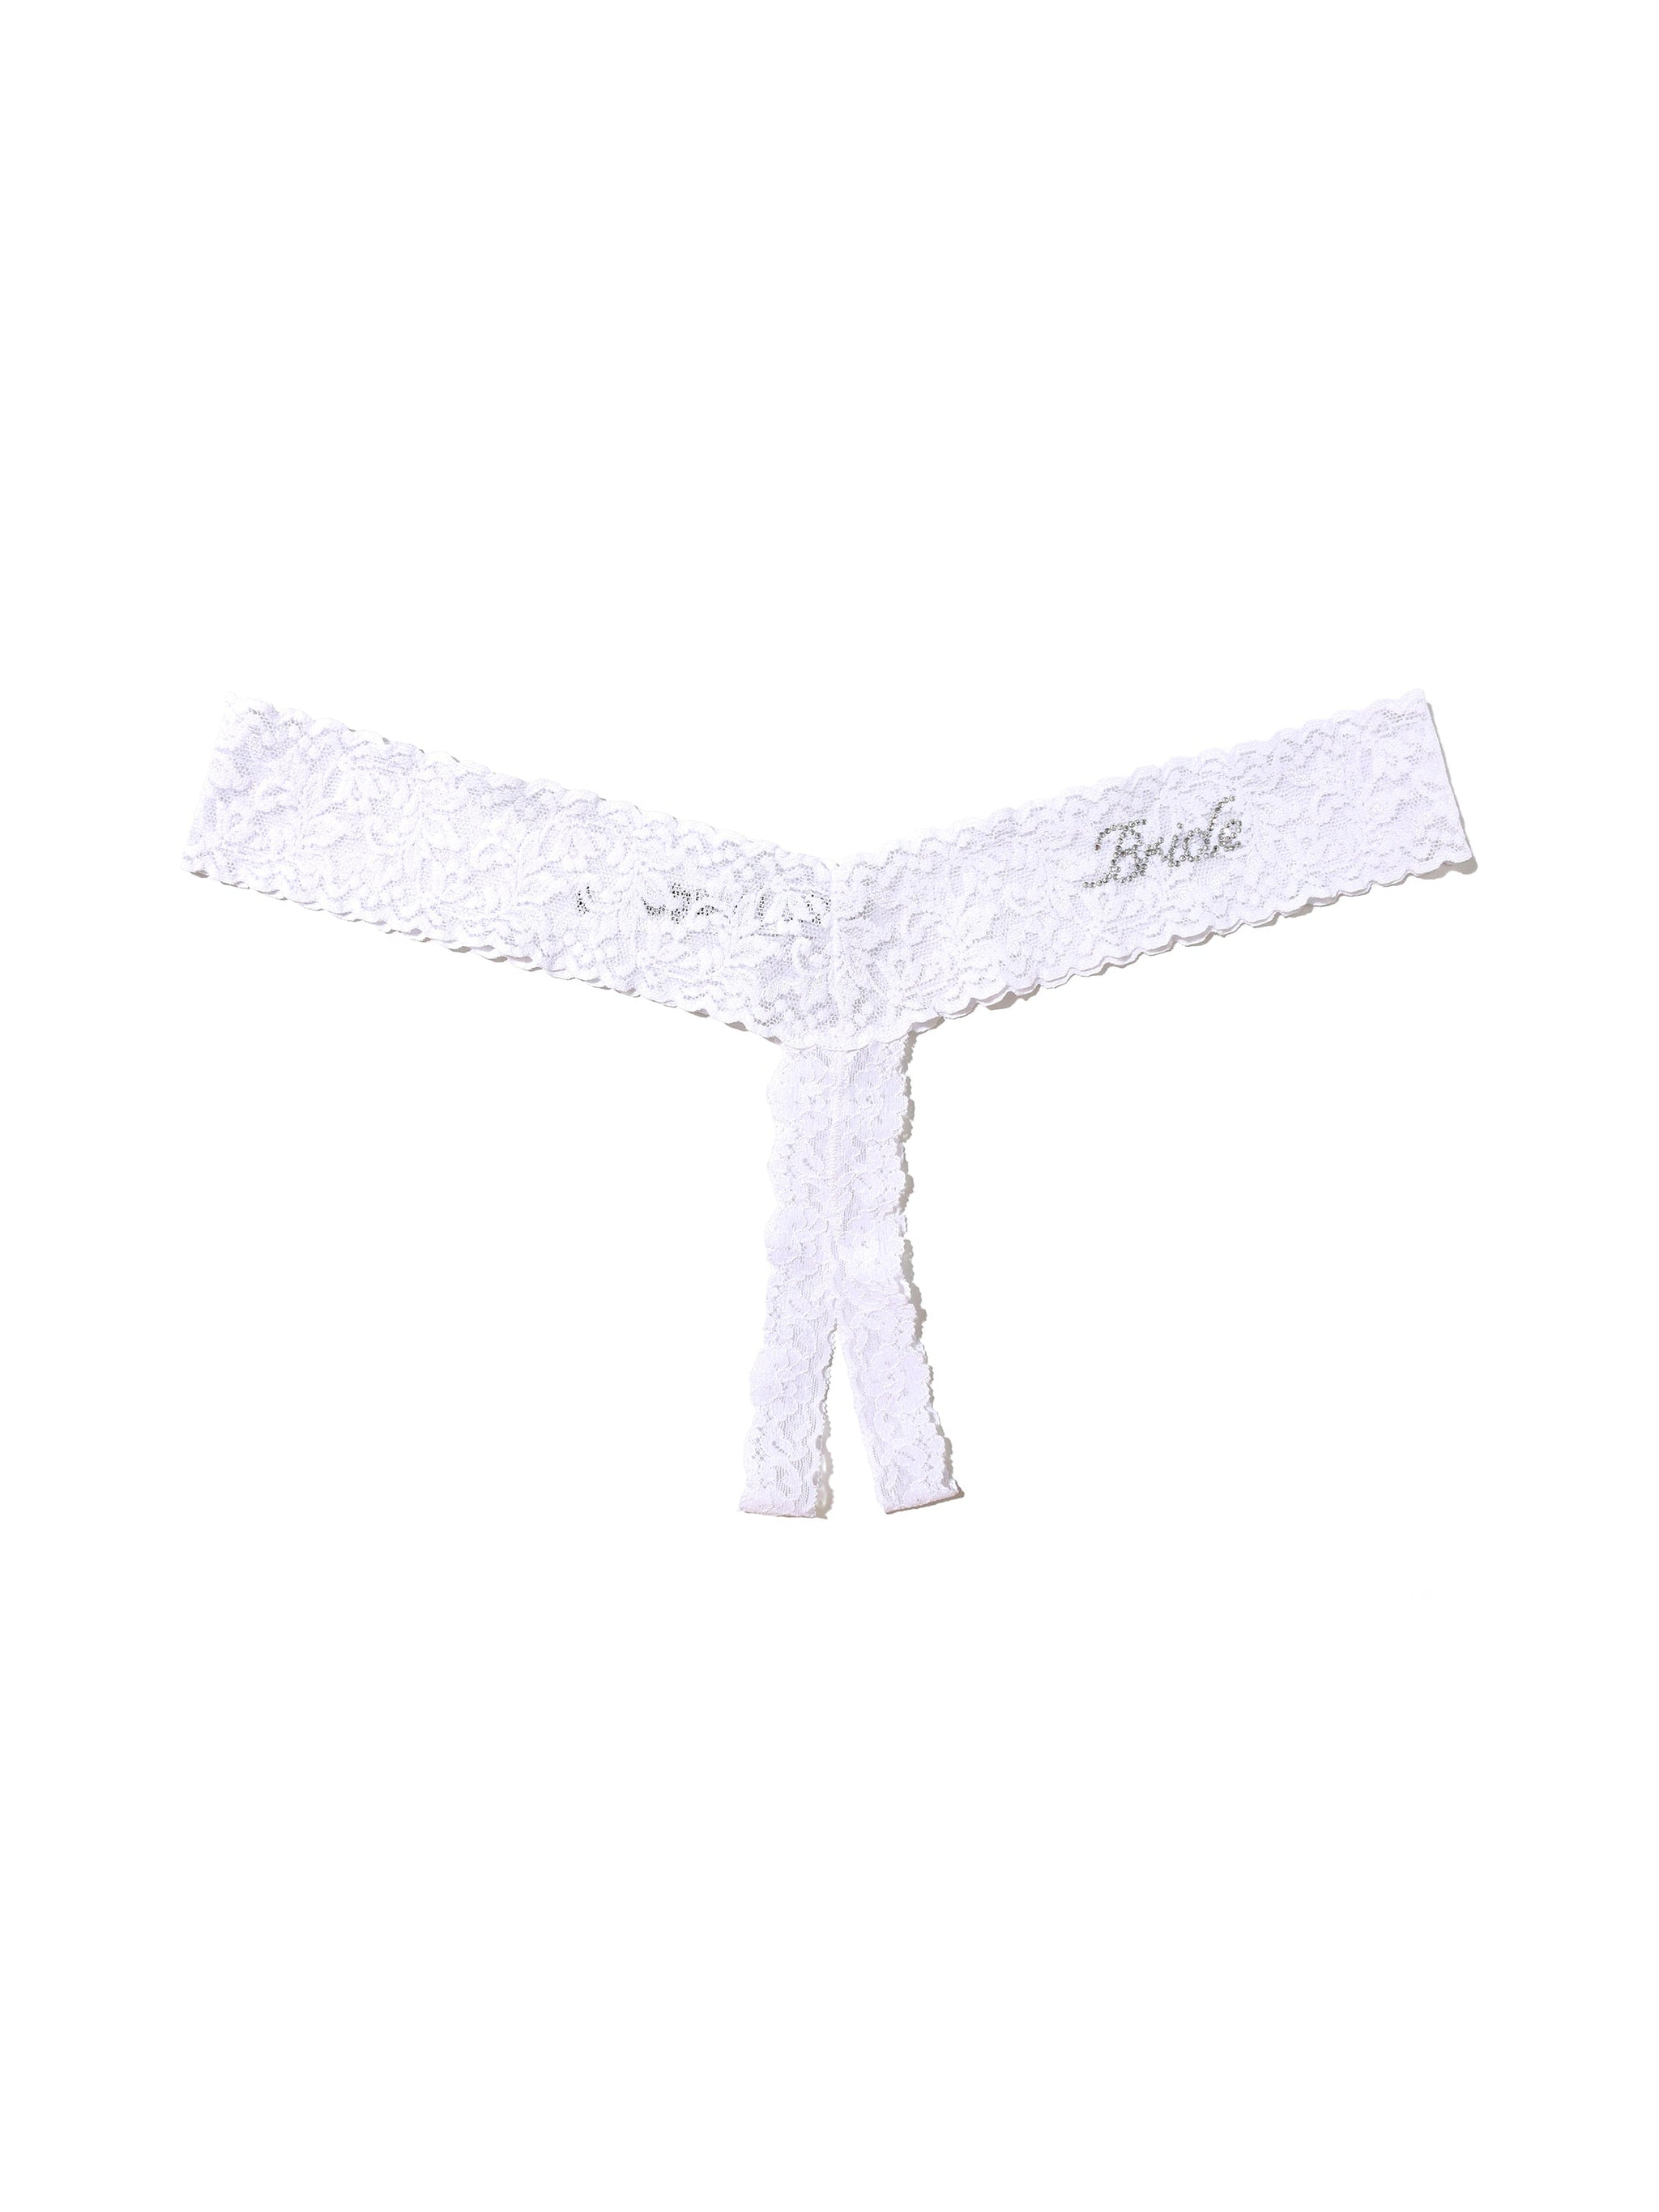 Crotchless Braided Cotton Panties 